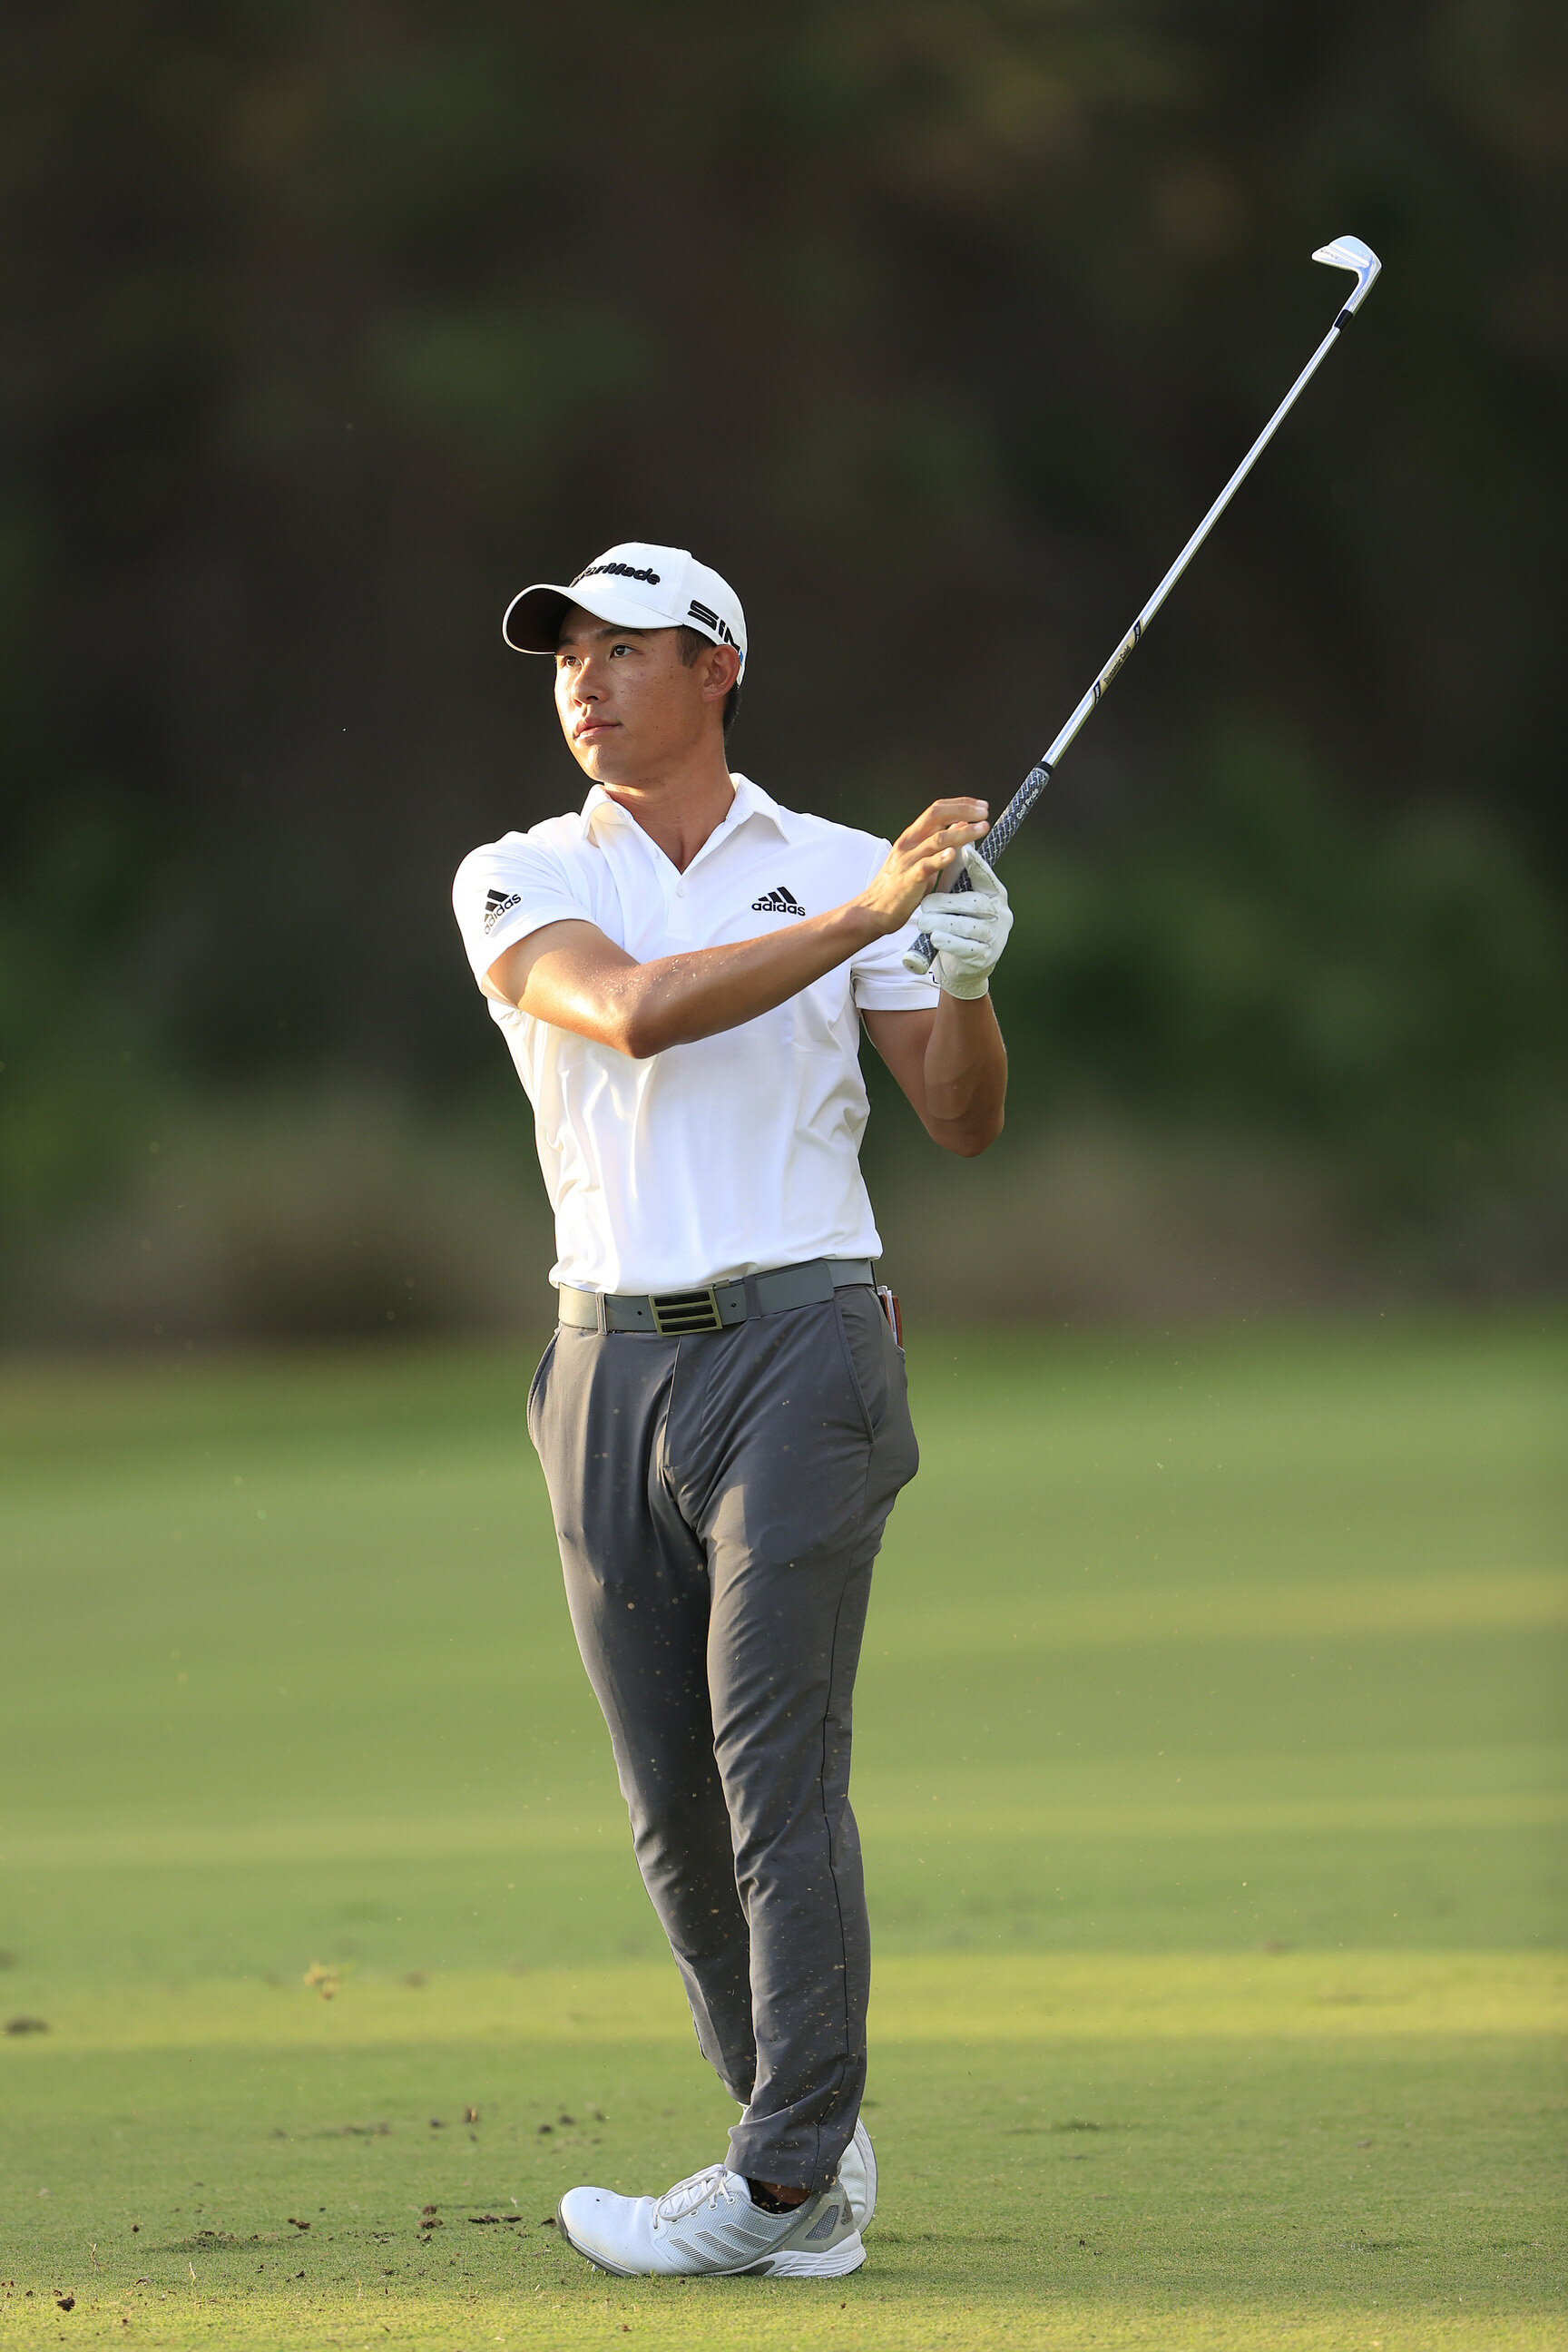  BRADENTON, FLORIDA - FEBRUARY 27: Collin Morikawa of the United States plays a shot on the 18th hole during the third round of the World Golf Championships-Workday Championship at The Concession on February 27, 2021 in Bradenton, Florida. (Photo by 